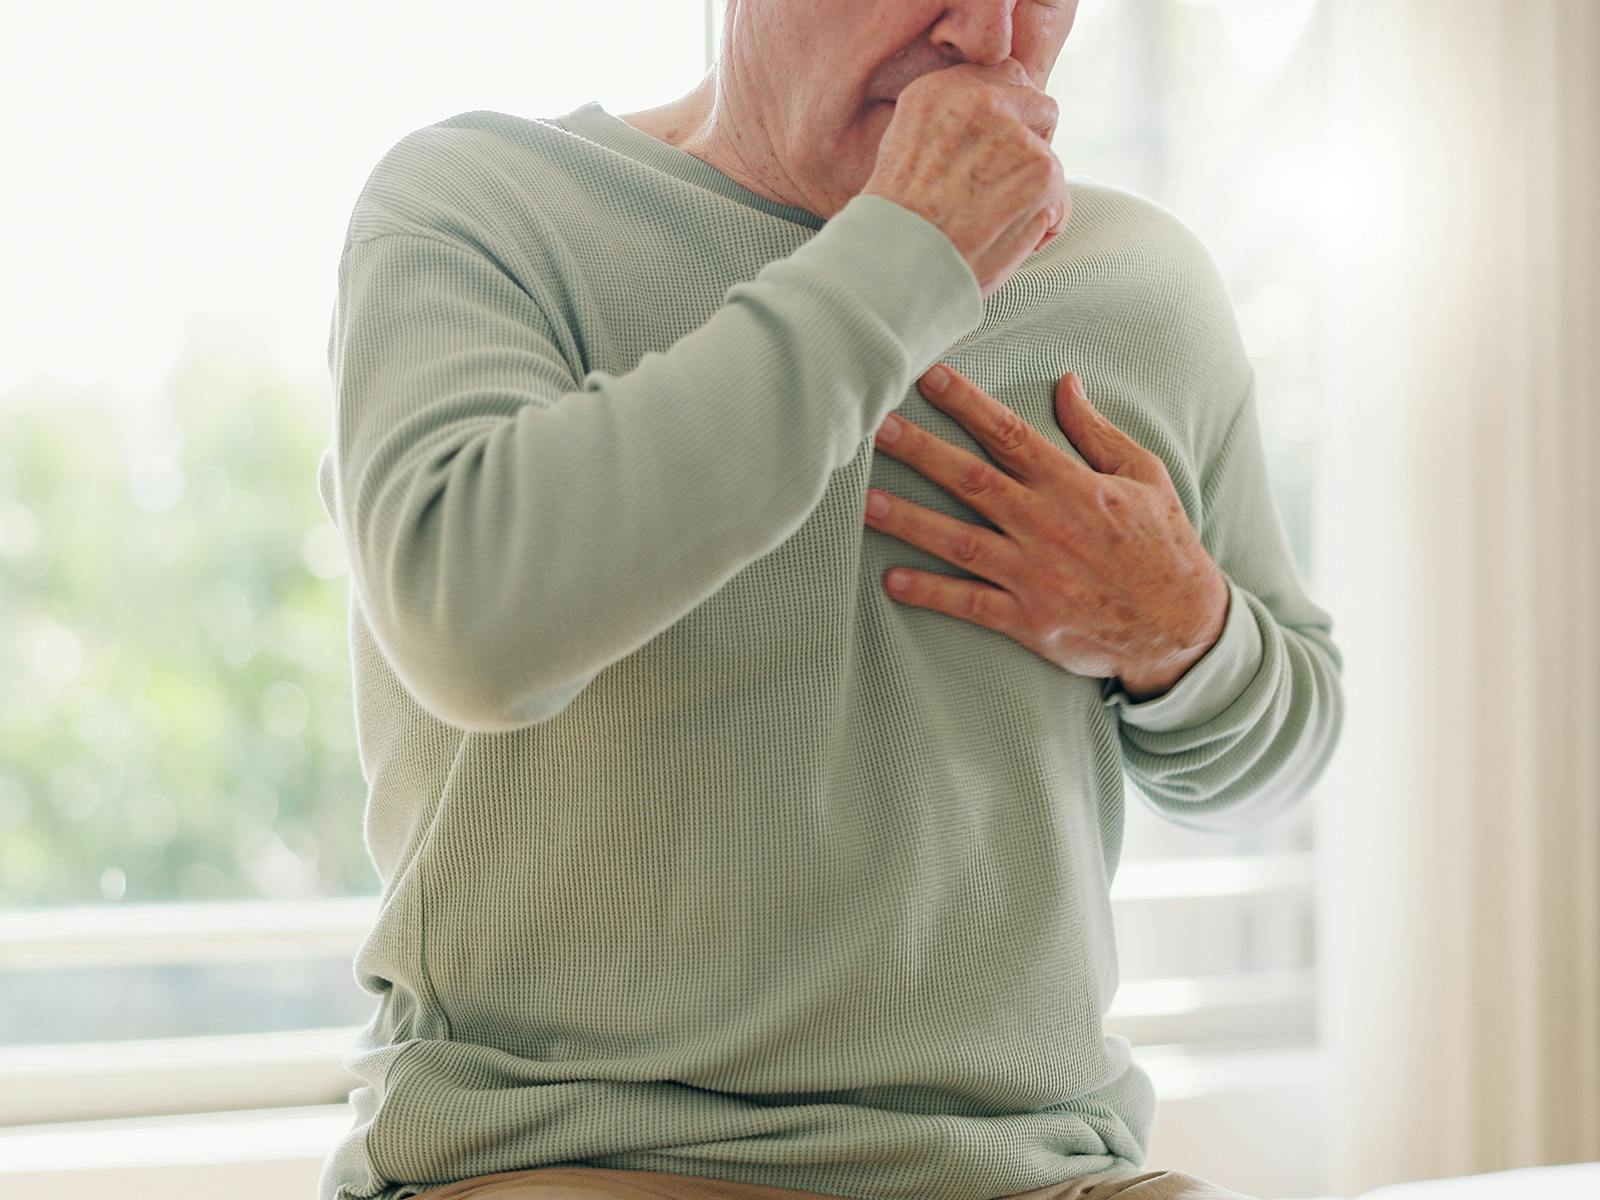 A man wearing a green shirt is coughing and clutching his chest